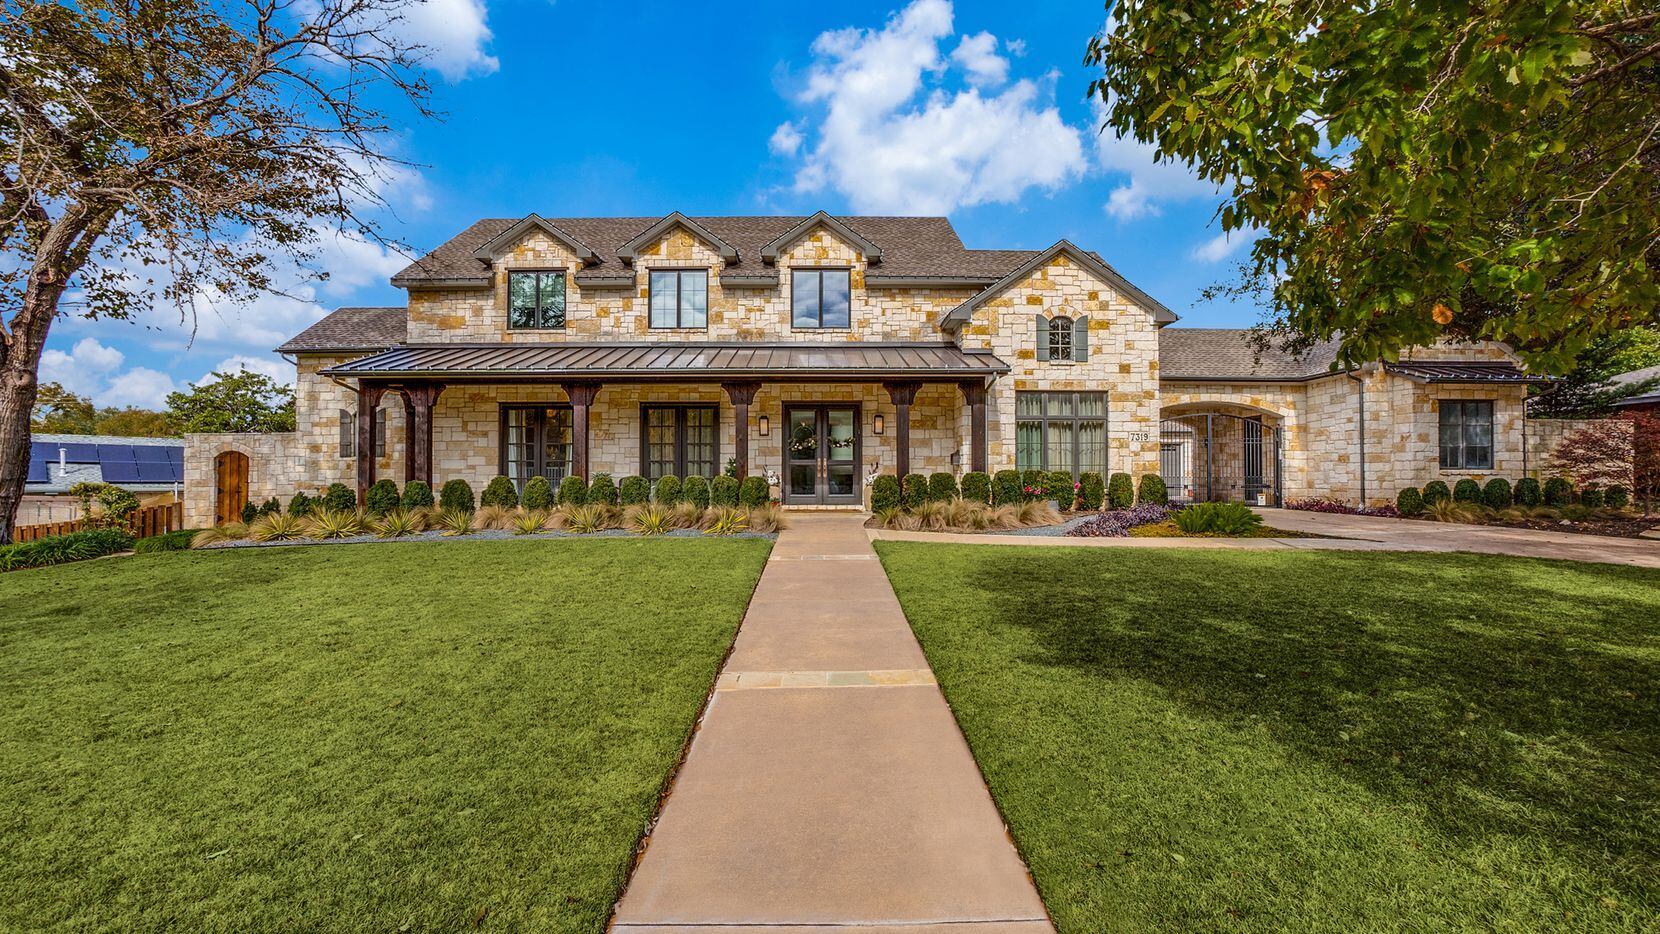 The agents of Allie Beth Allman & Associates have introduced new listings in North Dallas...